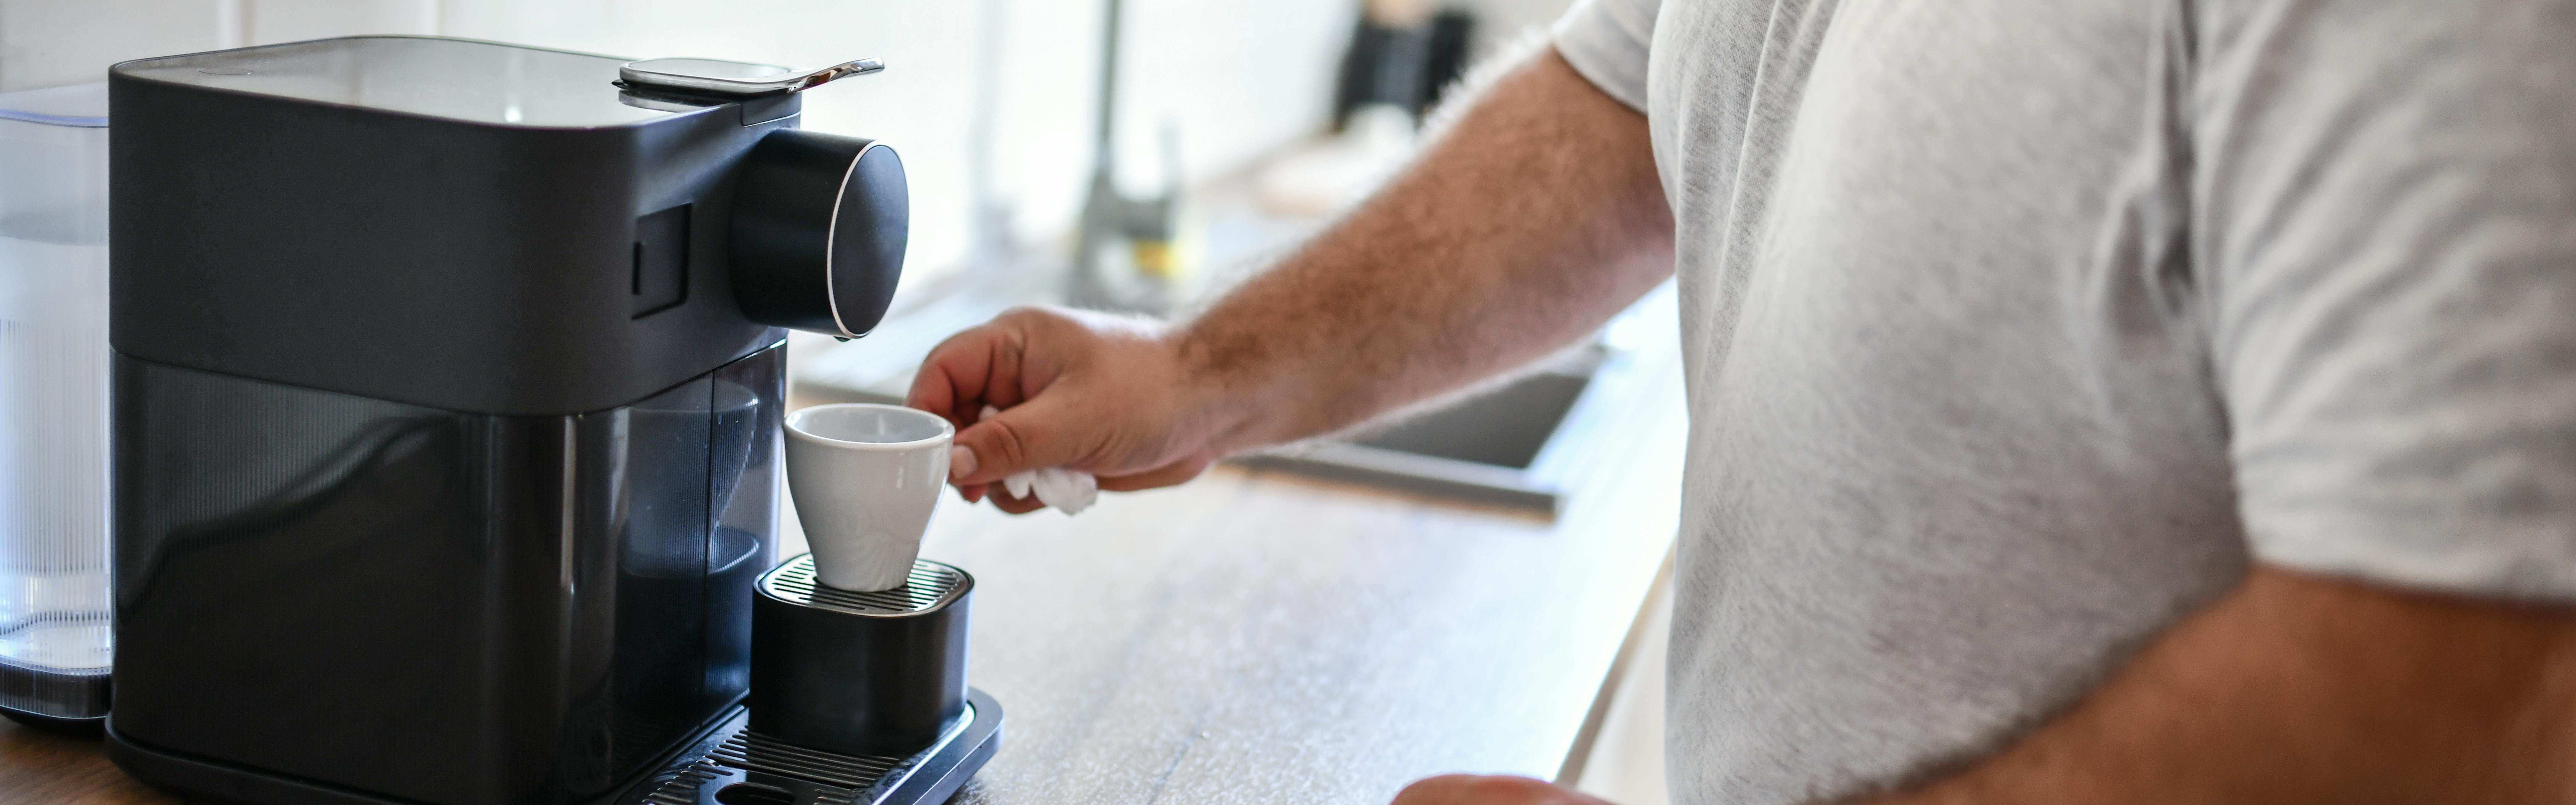 The Ultimate Automatic Milk Frother For Coffee Shops Is Finally Here